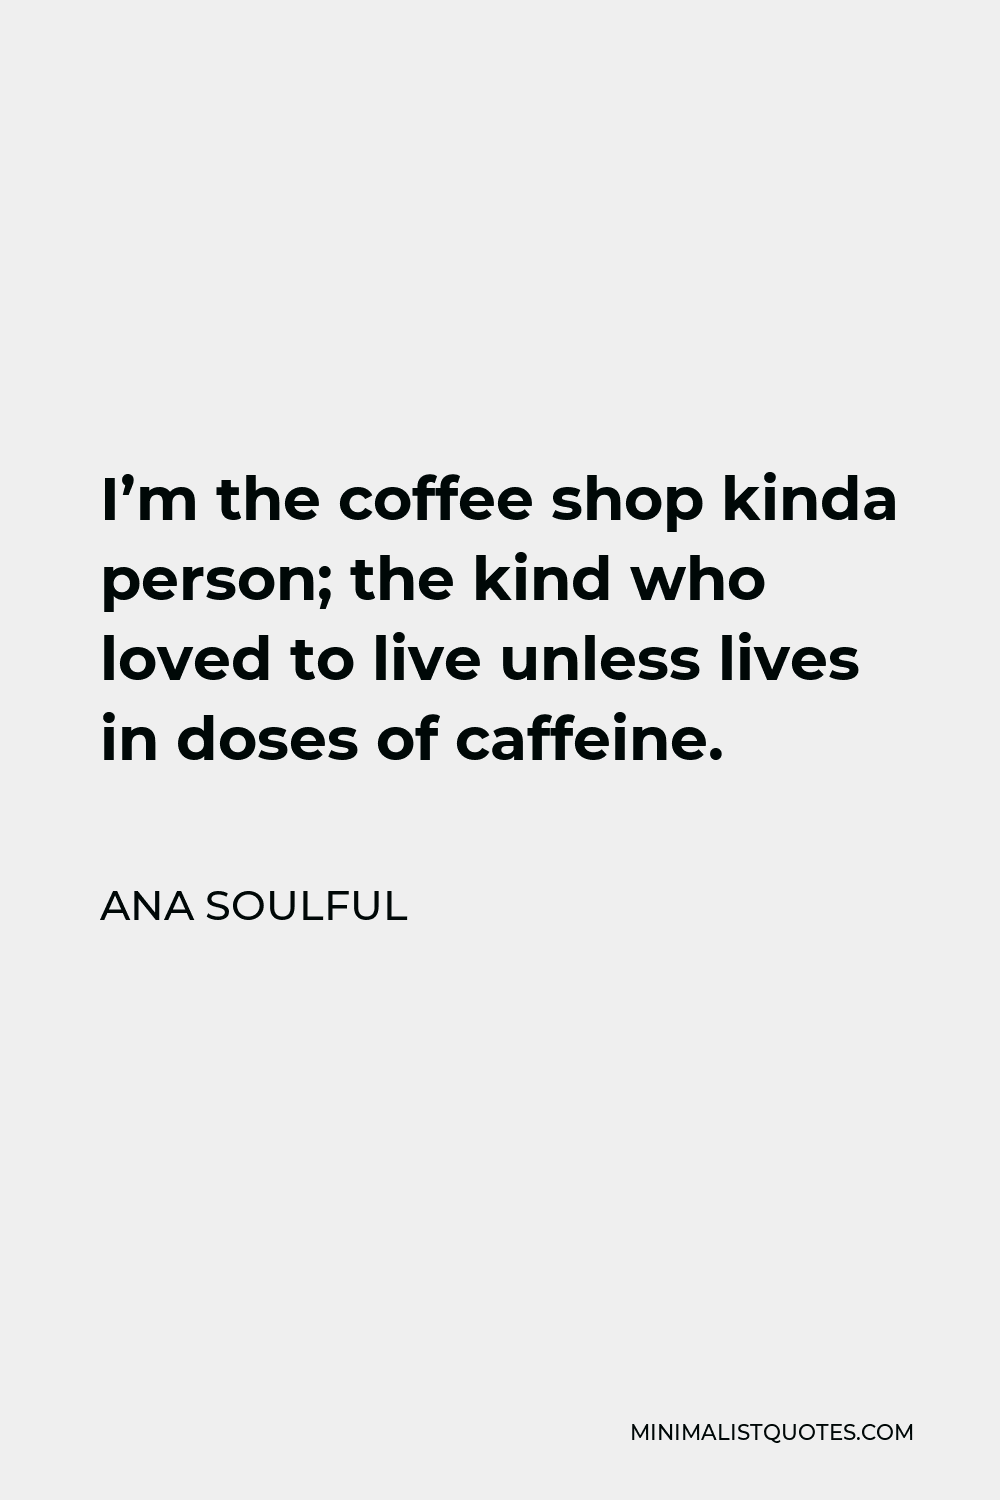 Ana Soulful Quote - I’m the coffee shop kinda person; the kind who loved to live unless lives in doses of caffeine.